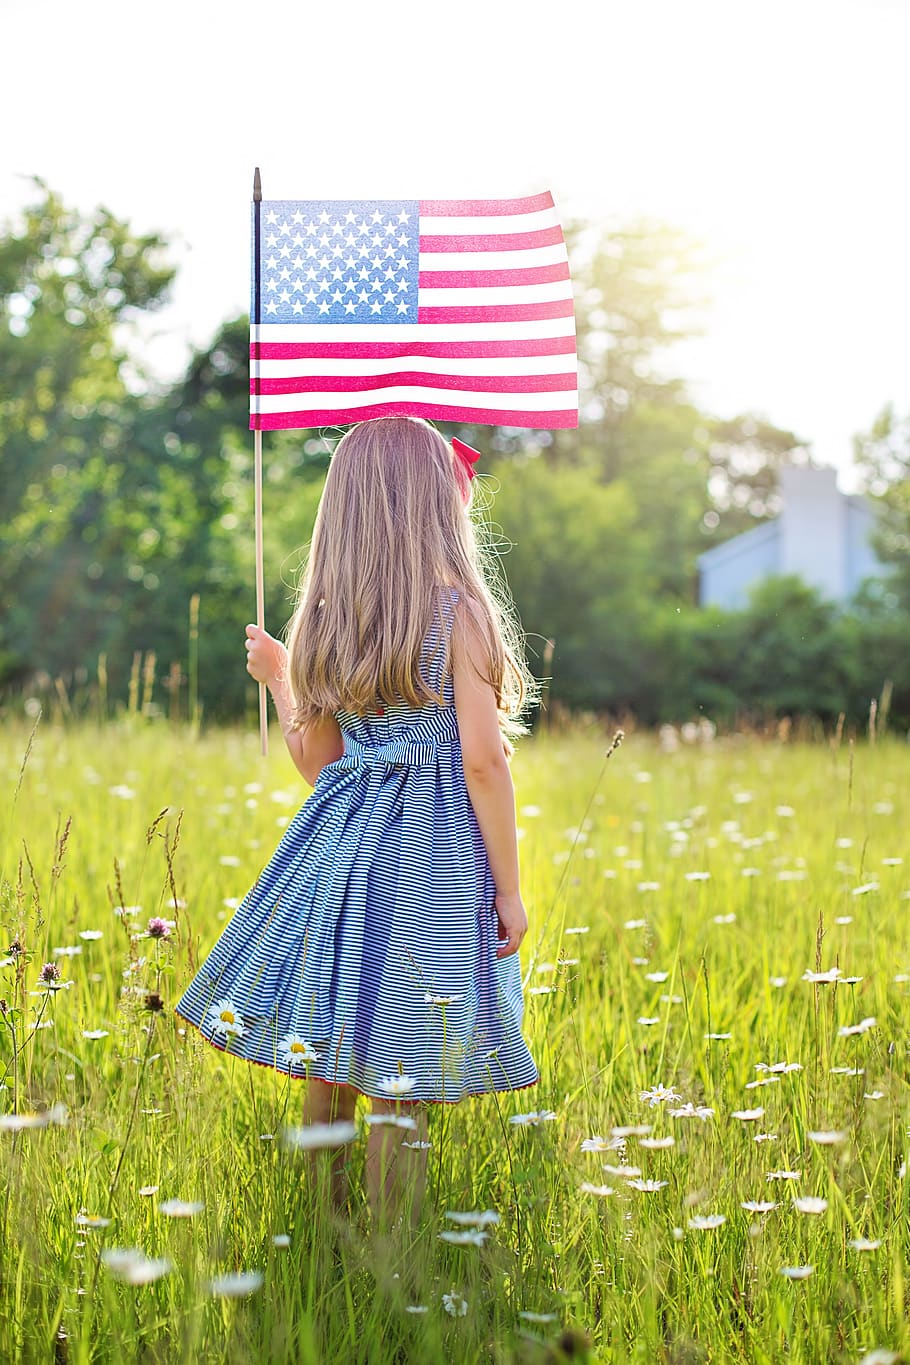 fourth of july, 4th of july, independence day, independence, flag, little girl, celebration, usa, america, holiday